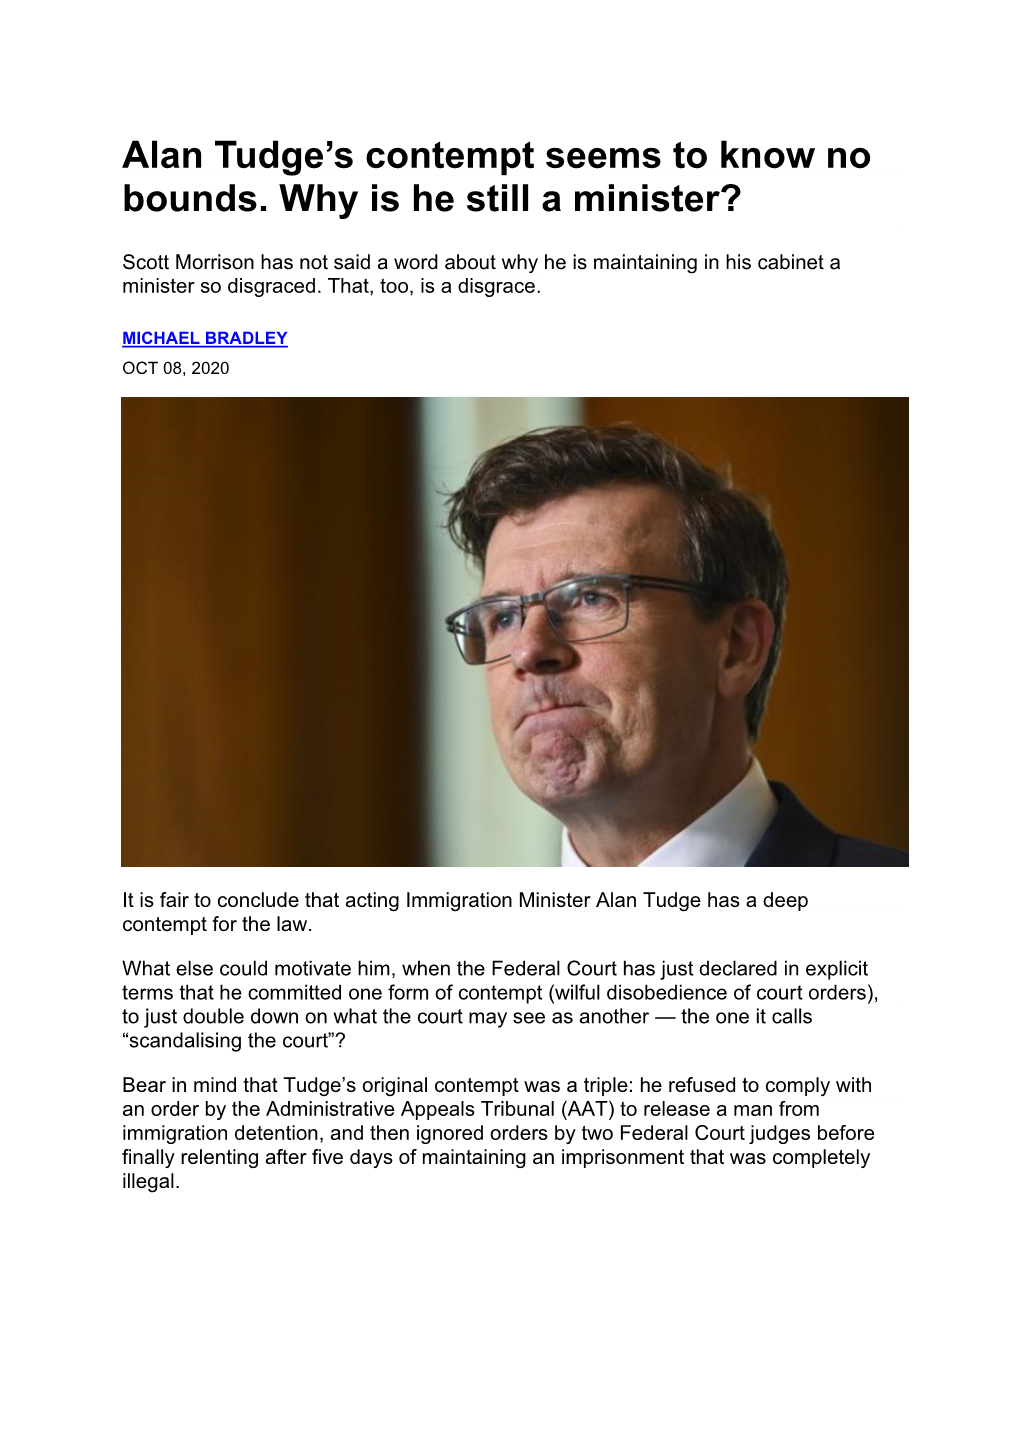 Alan Tudge's Contempt Seems to Know No Bounds. Why Is He Still a Minister?